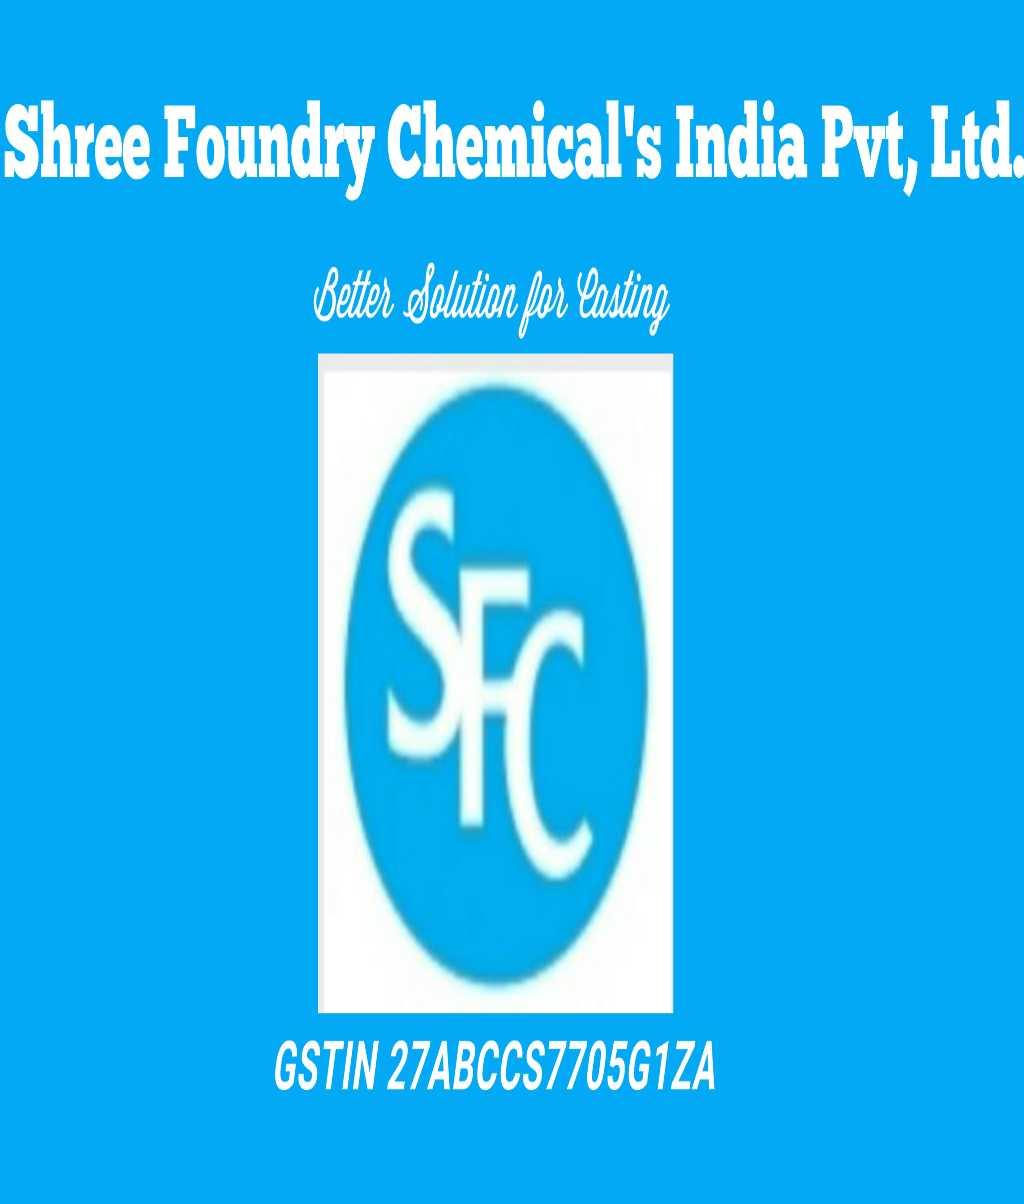 SHREE FOUNDRY CHEMICALS INDIA PRIVATE LIMITED